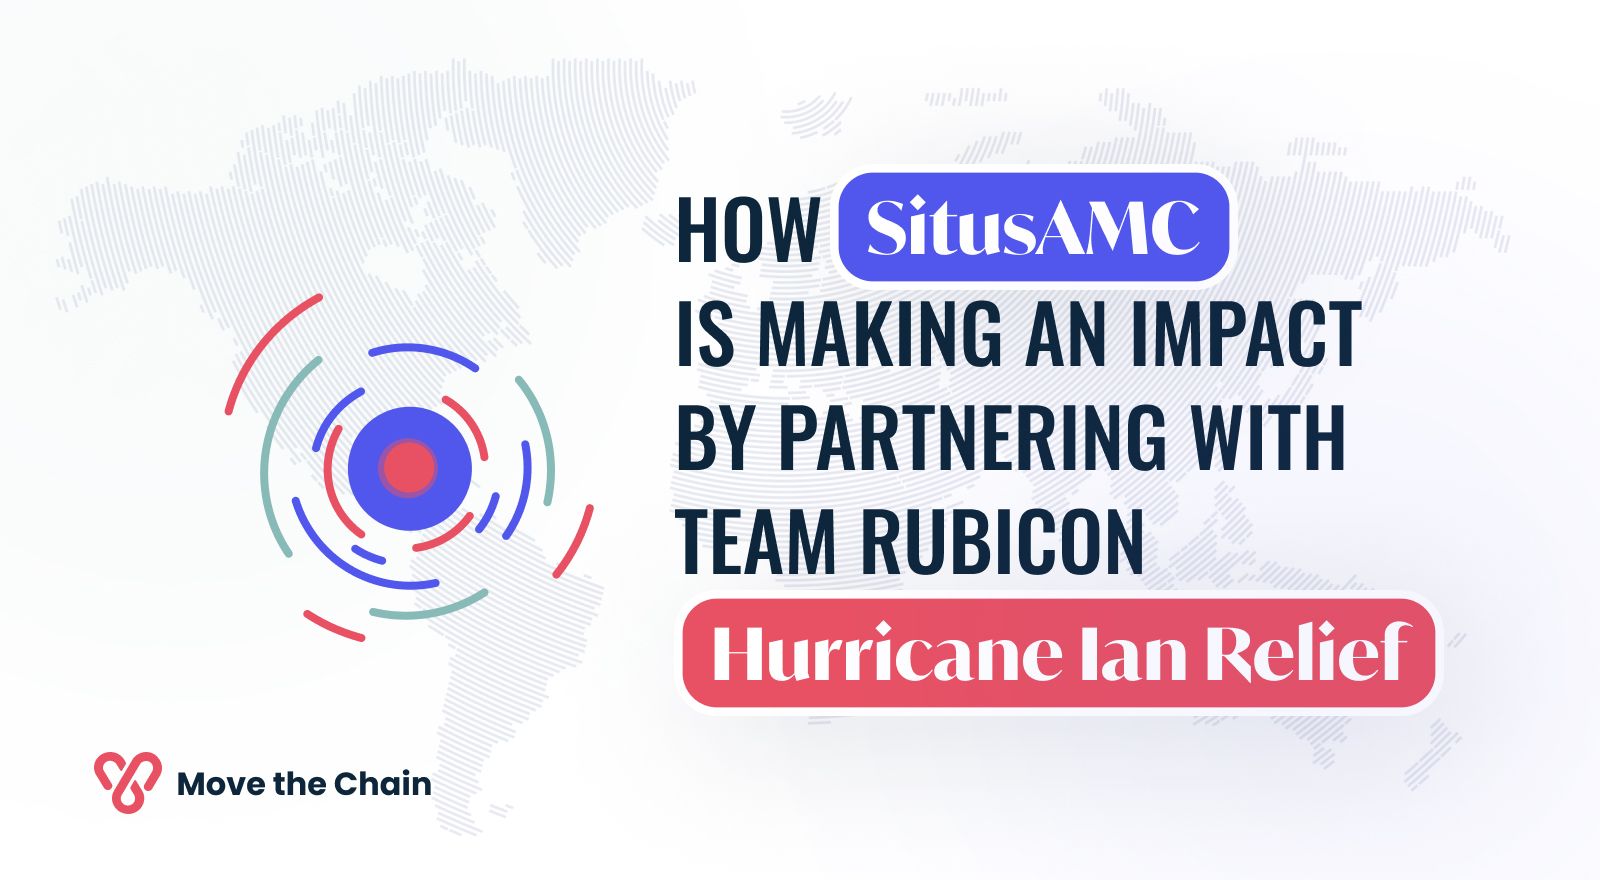 Hurricane Ian Relief: How SitusAMC is making an impact by partnering with Team Rubicon